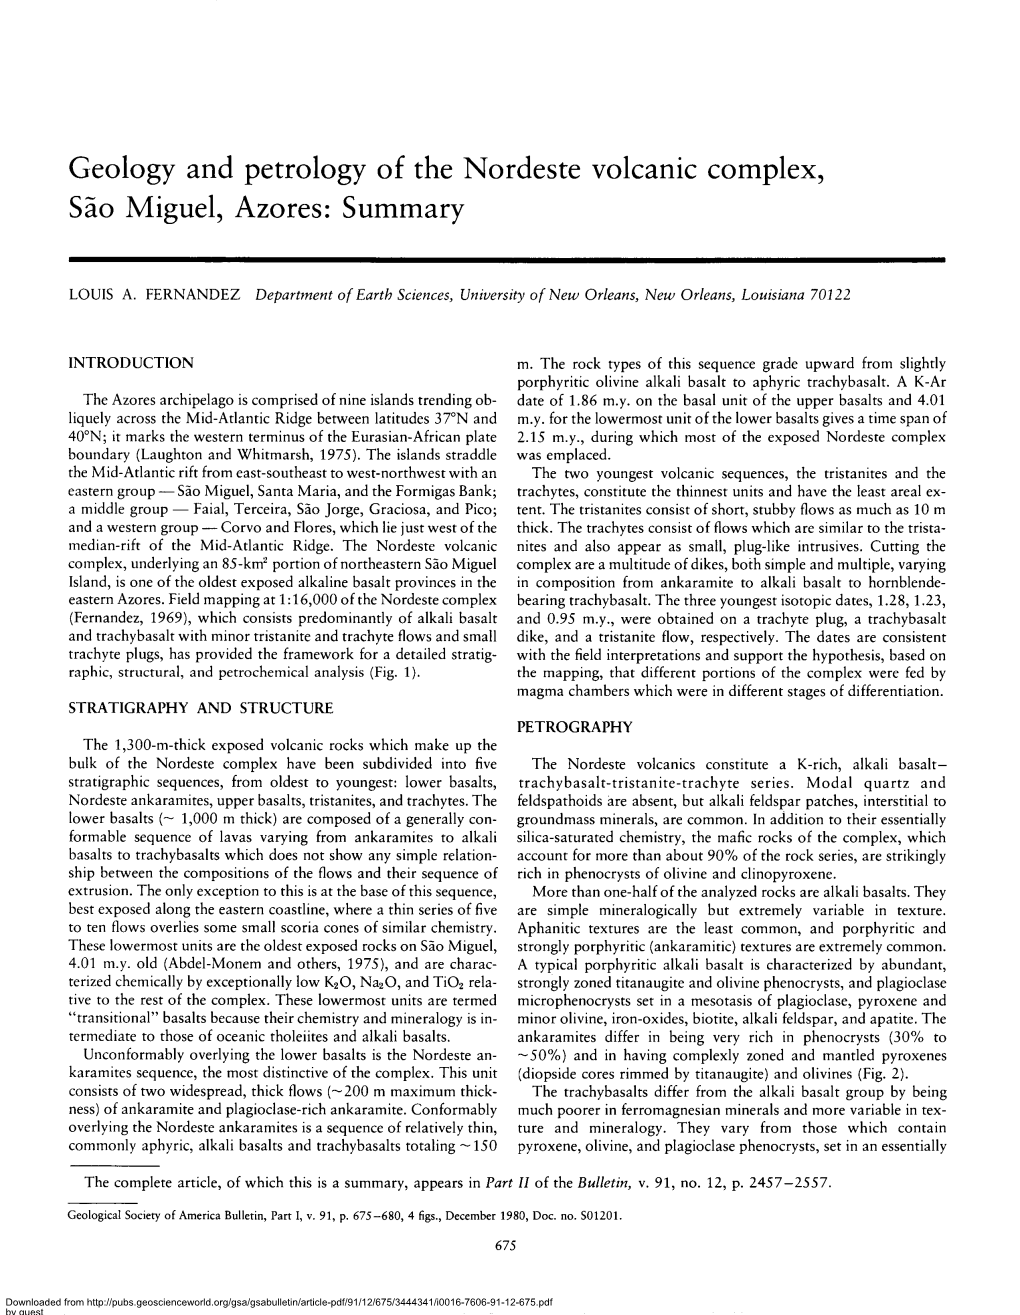 Geology and Petrology of the Nordeste Volcanic Complex, Sao Miguel, Azores: Summary